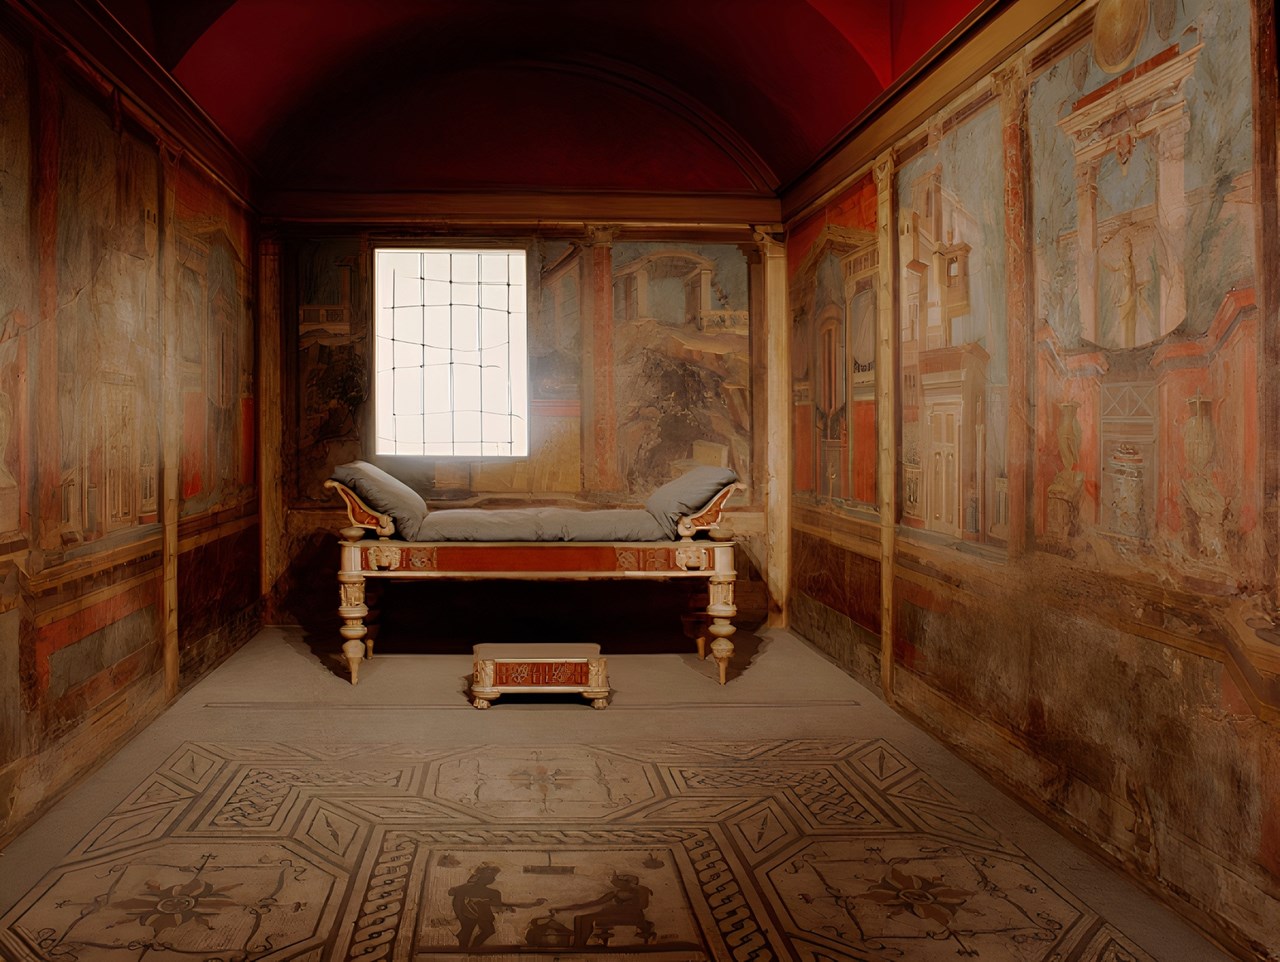 Room M of the Villa of P. Fannius Synistor at Boscoreale, buried by the eruption of Vesuvius in A.D. 79, functioned as a bedroom.  The rear wall shows rocky terrain with balustrades and an arbor above, a small cave or grotto sheltering a fountain, and a small figure of Hekate below. In the center of the wall, between two columns, a parapet embellished with a yellow monochrome landscape supports a glass bowl filled with fruit.  The side walls of the room are symmetrical. Each wall is subdivided into four sections by a pilaster that defines the area of the couch and by two ornate columns. The paintings depict enclosed courtyards in which we glimpse the tops of statuary, rotundas, and pylons as well as vegetation. These precincts alternate with townscapes combining colonnaded buildings and projecting terraces. https://www.metmuseum.org/art/collection/search/247017